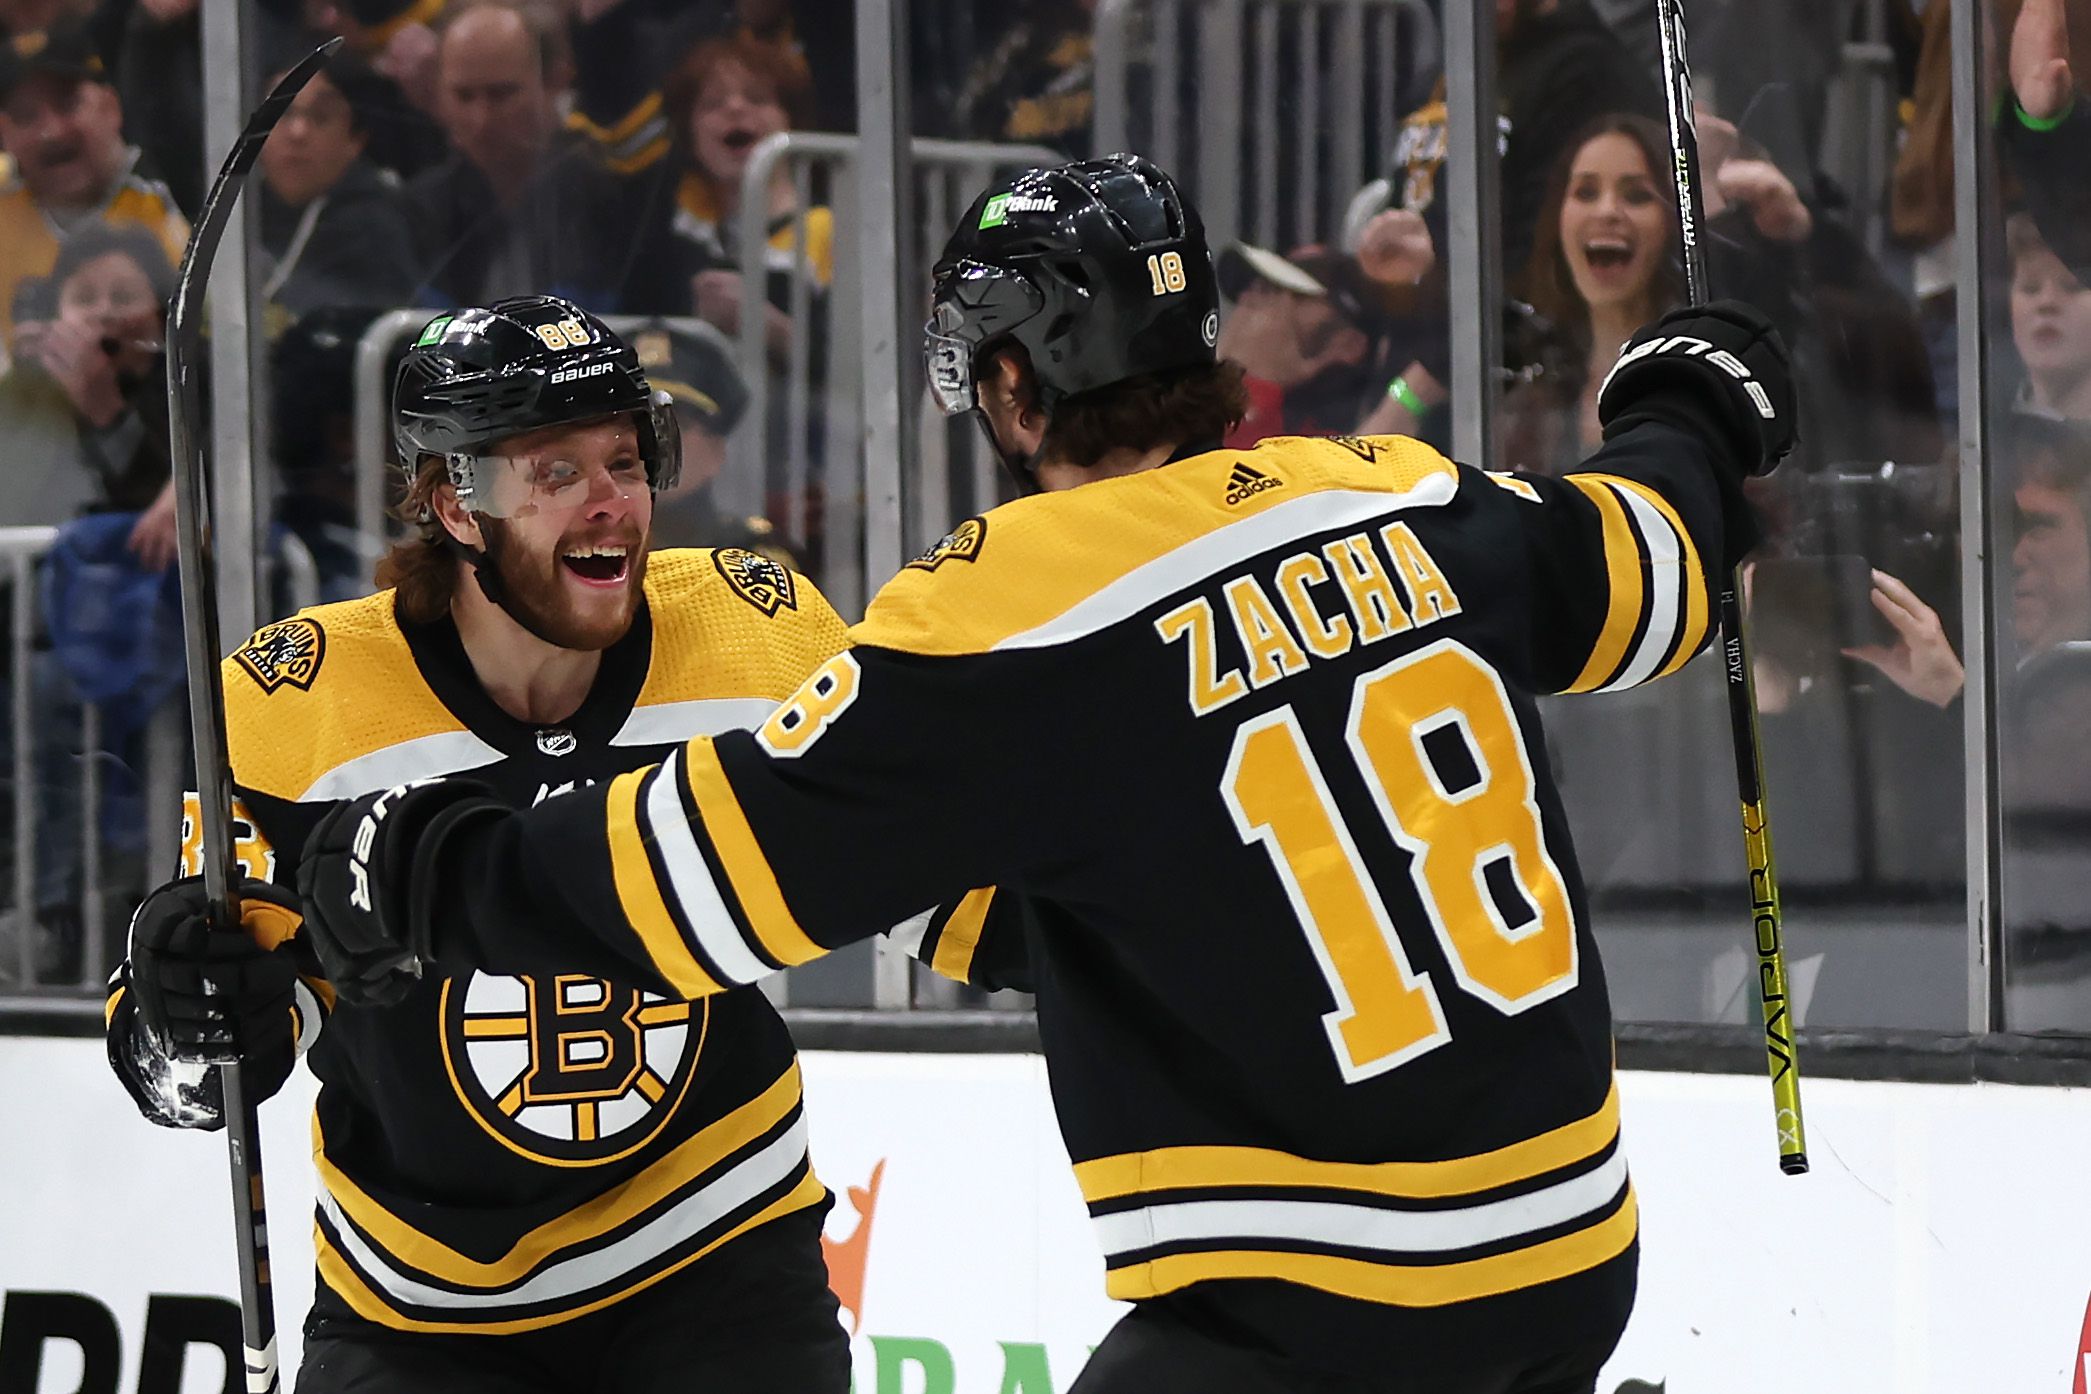 Pavel Zacha #18 of the Boston Bruins celebrates with David Pastrnak #88 after scoring a goal against the New Jersey Devils during the first period at TD Garden on April 08, 2023 in Boston, Massachusetts.